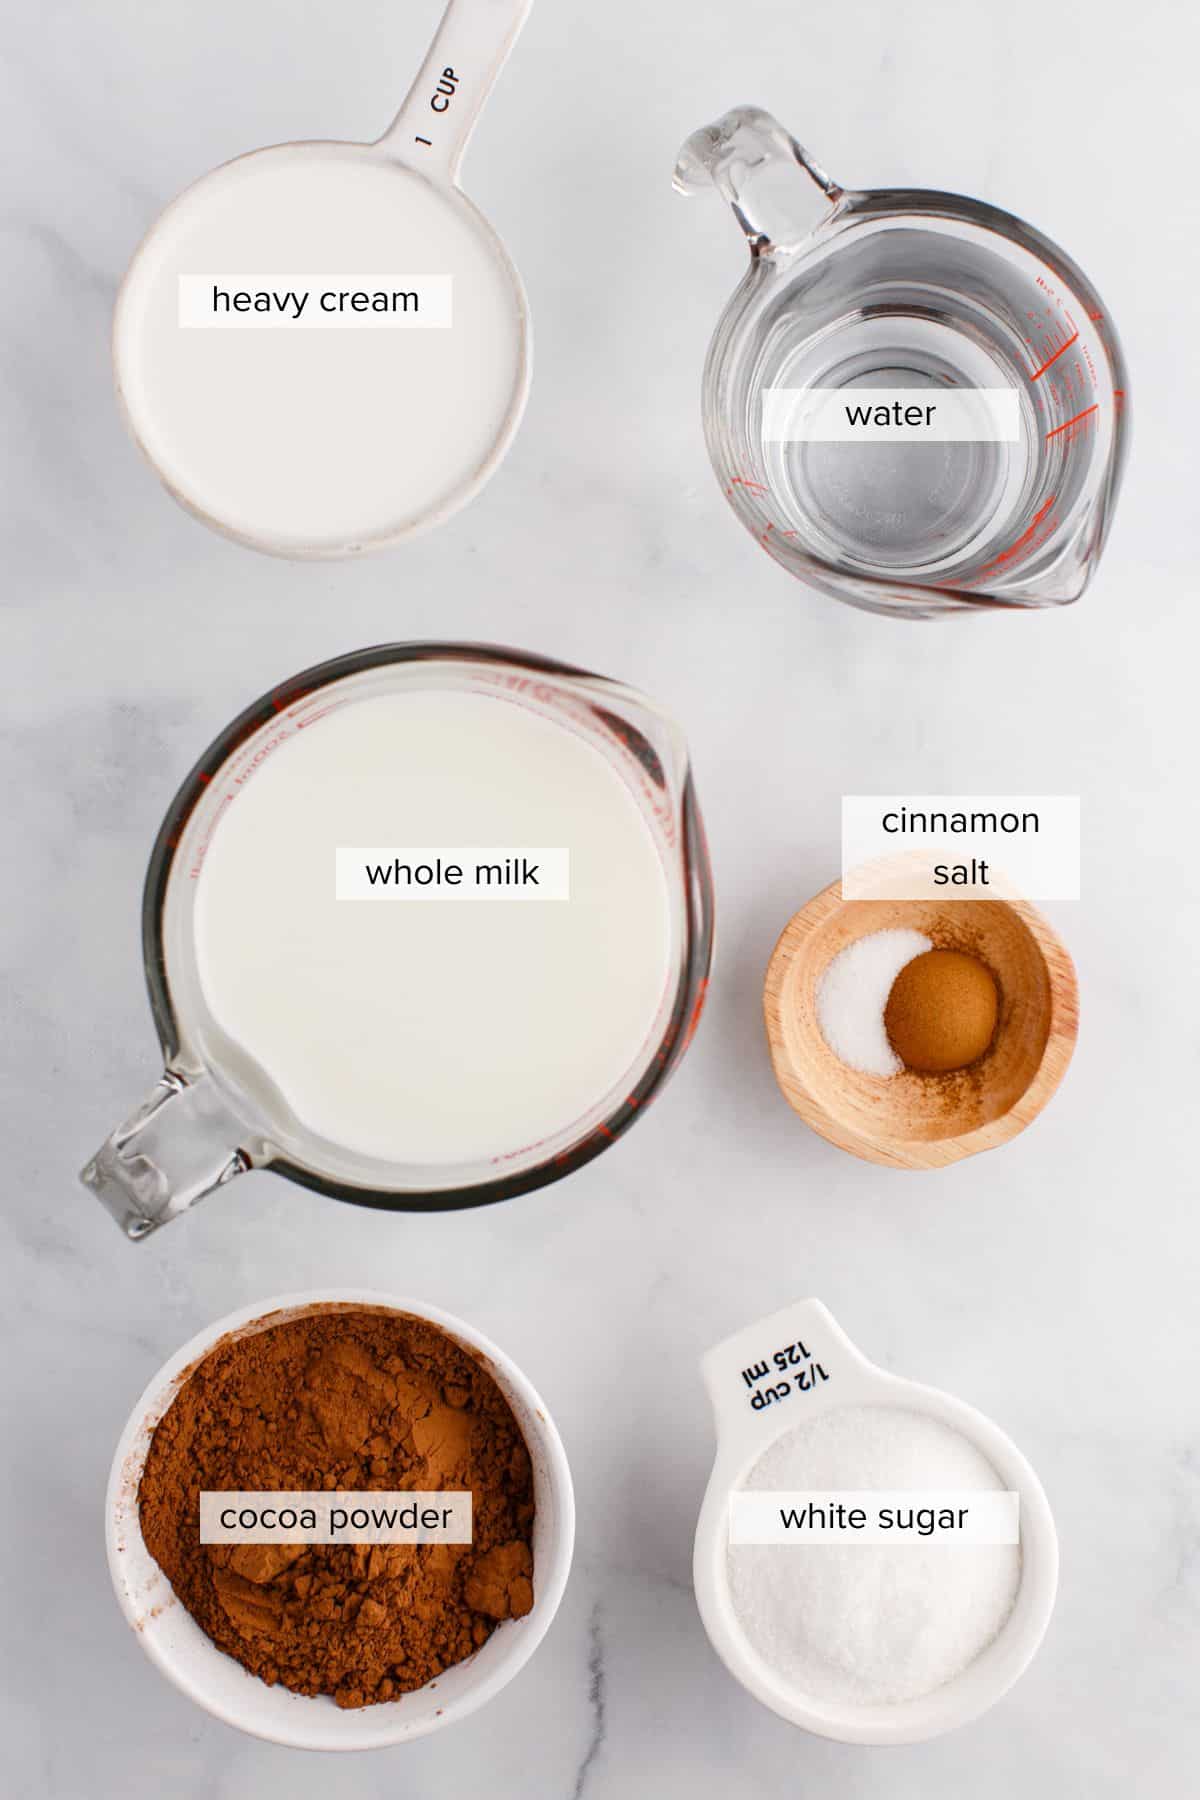 Ingredients to make a batch of hot chocolate in an Instant Pot.